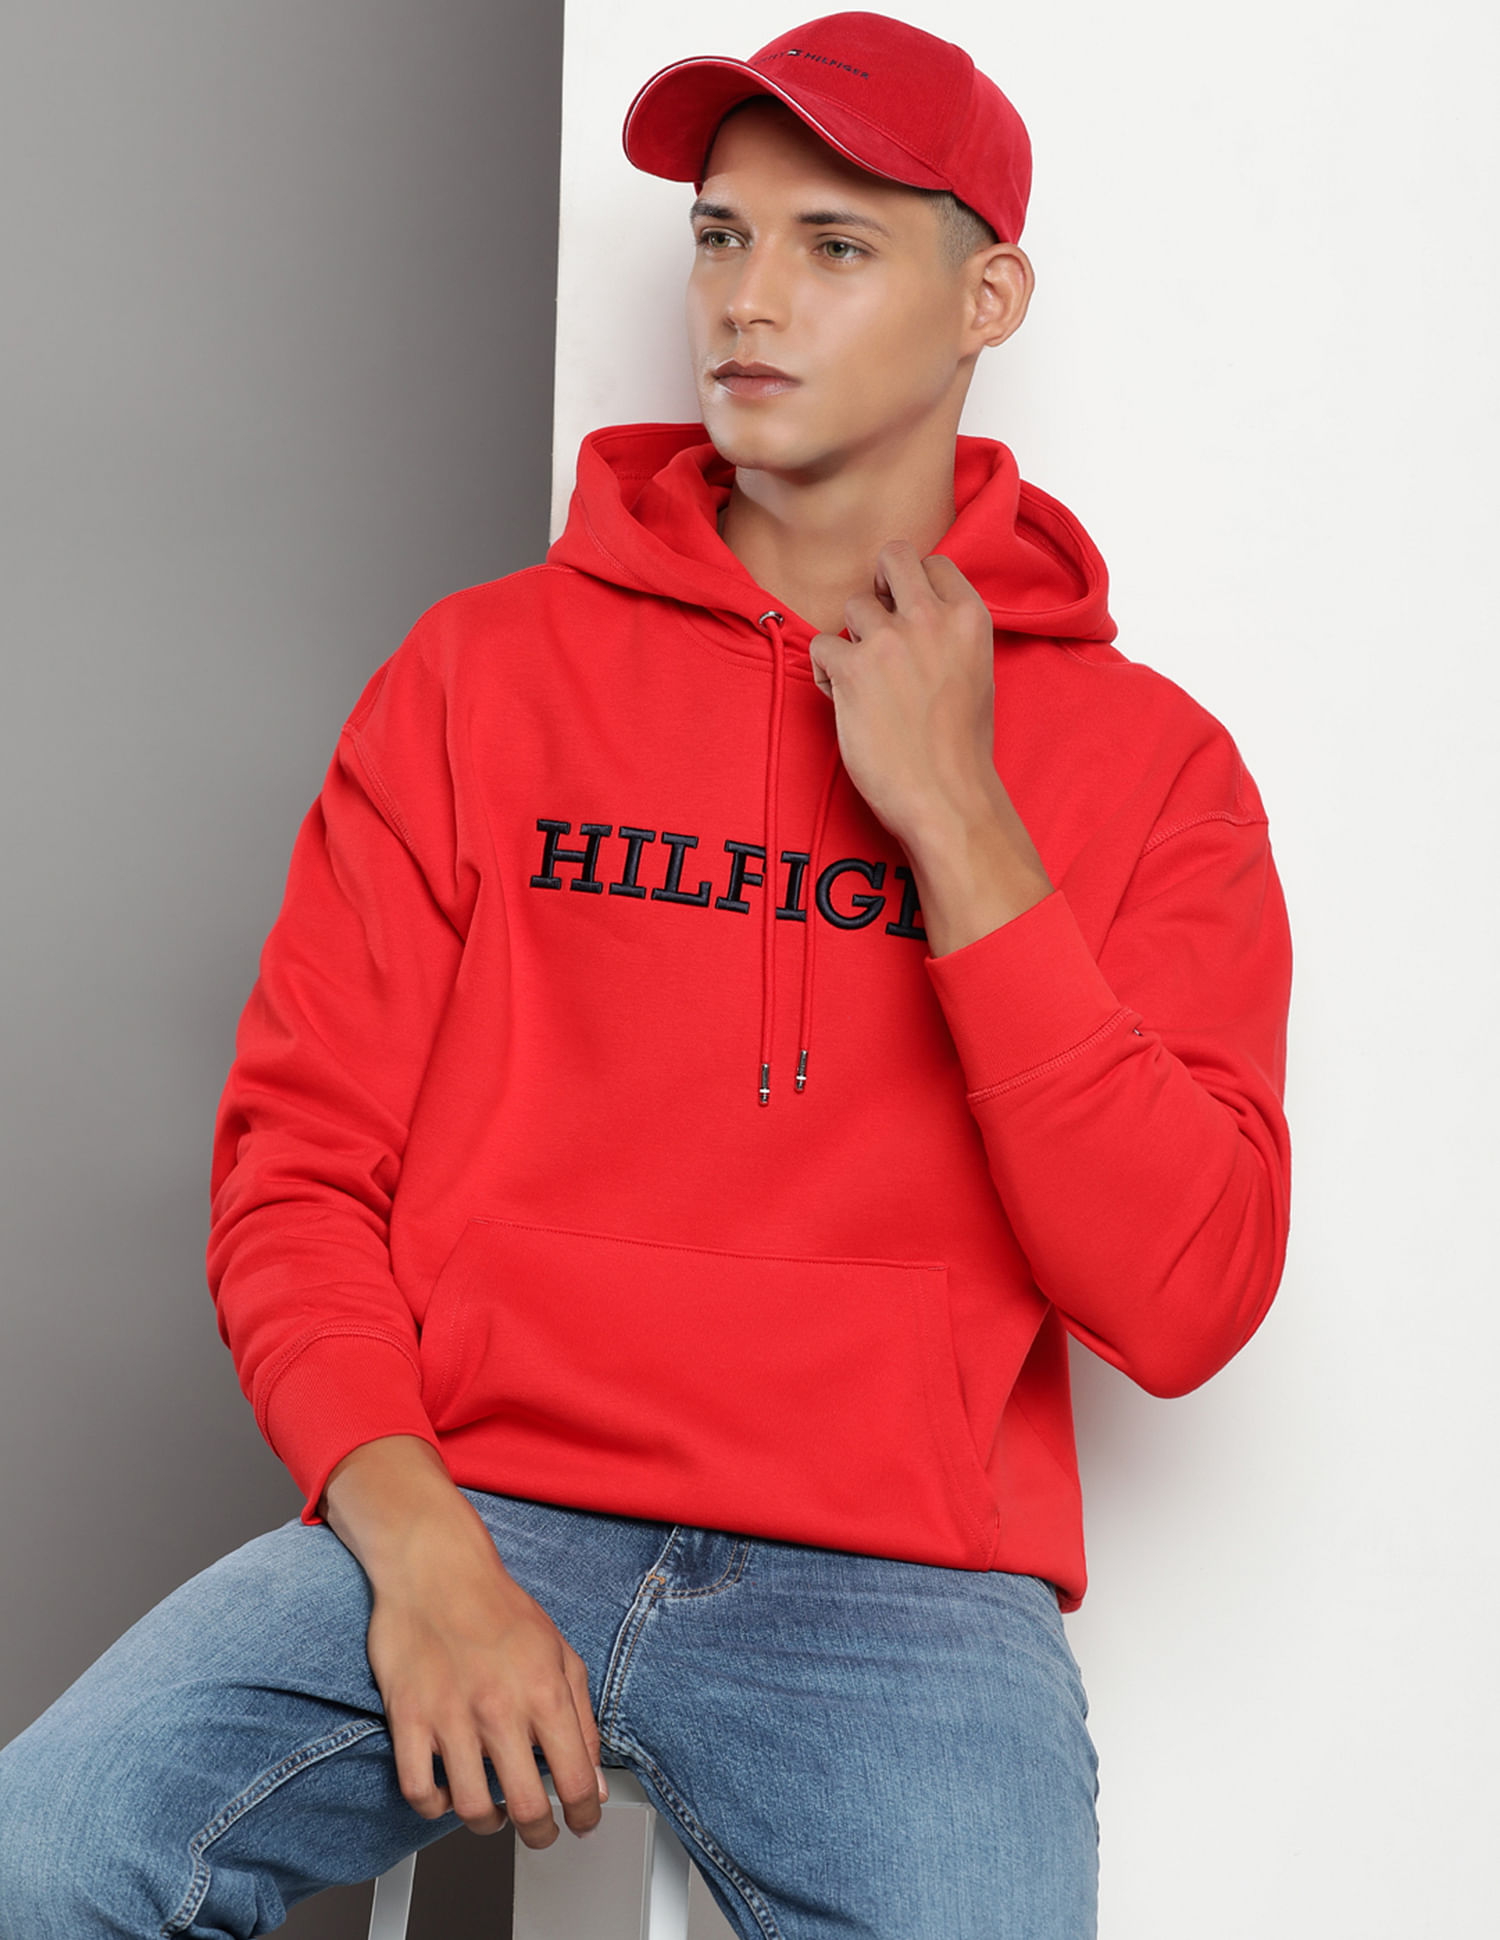 Tommy Transitional Sweatshirt Monotype Buy Embroidered Hilfiger Cotton